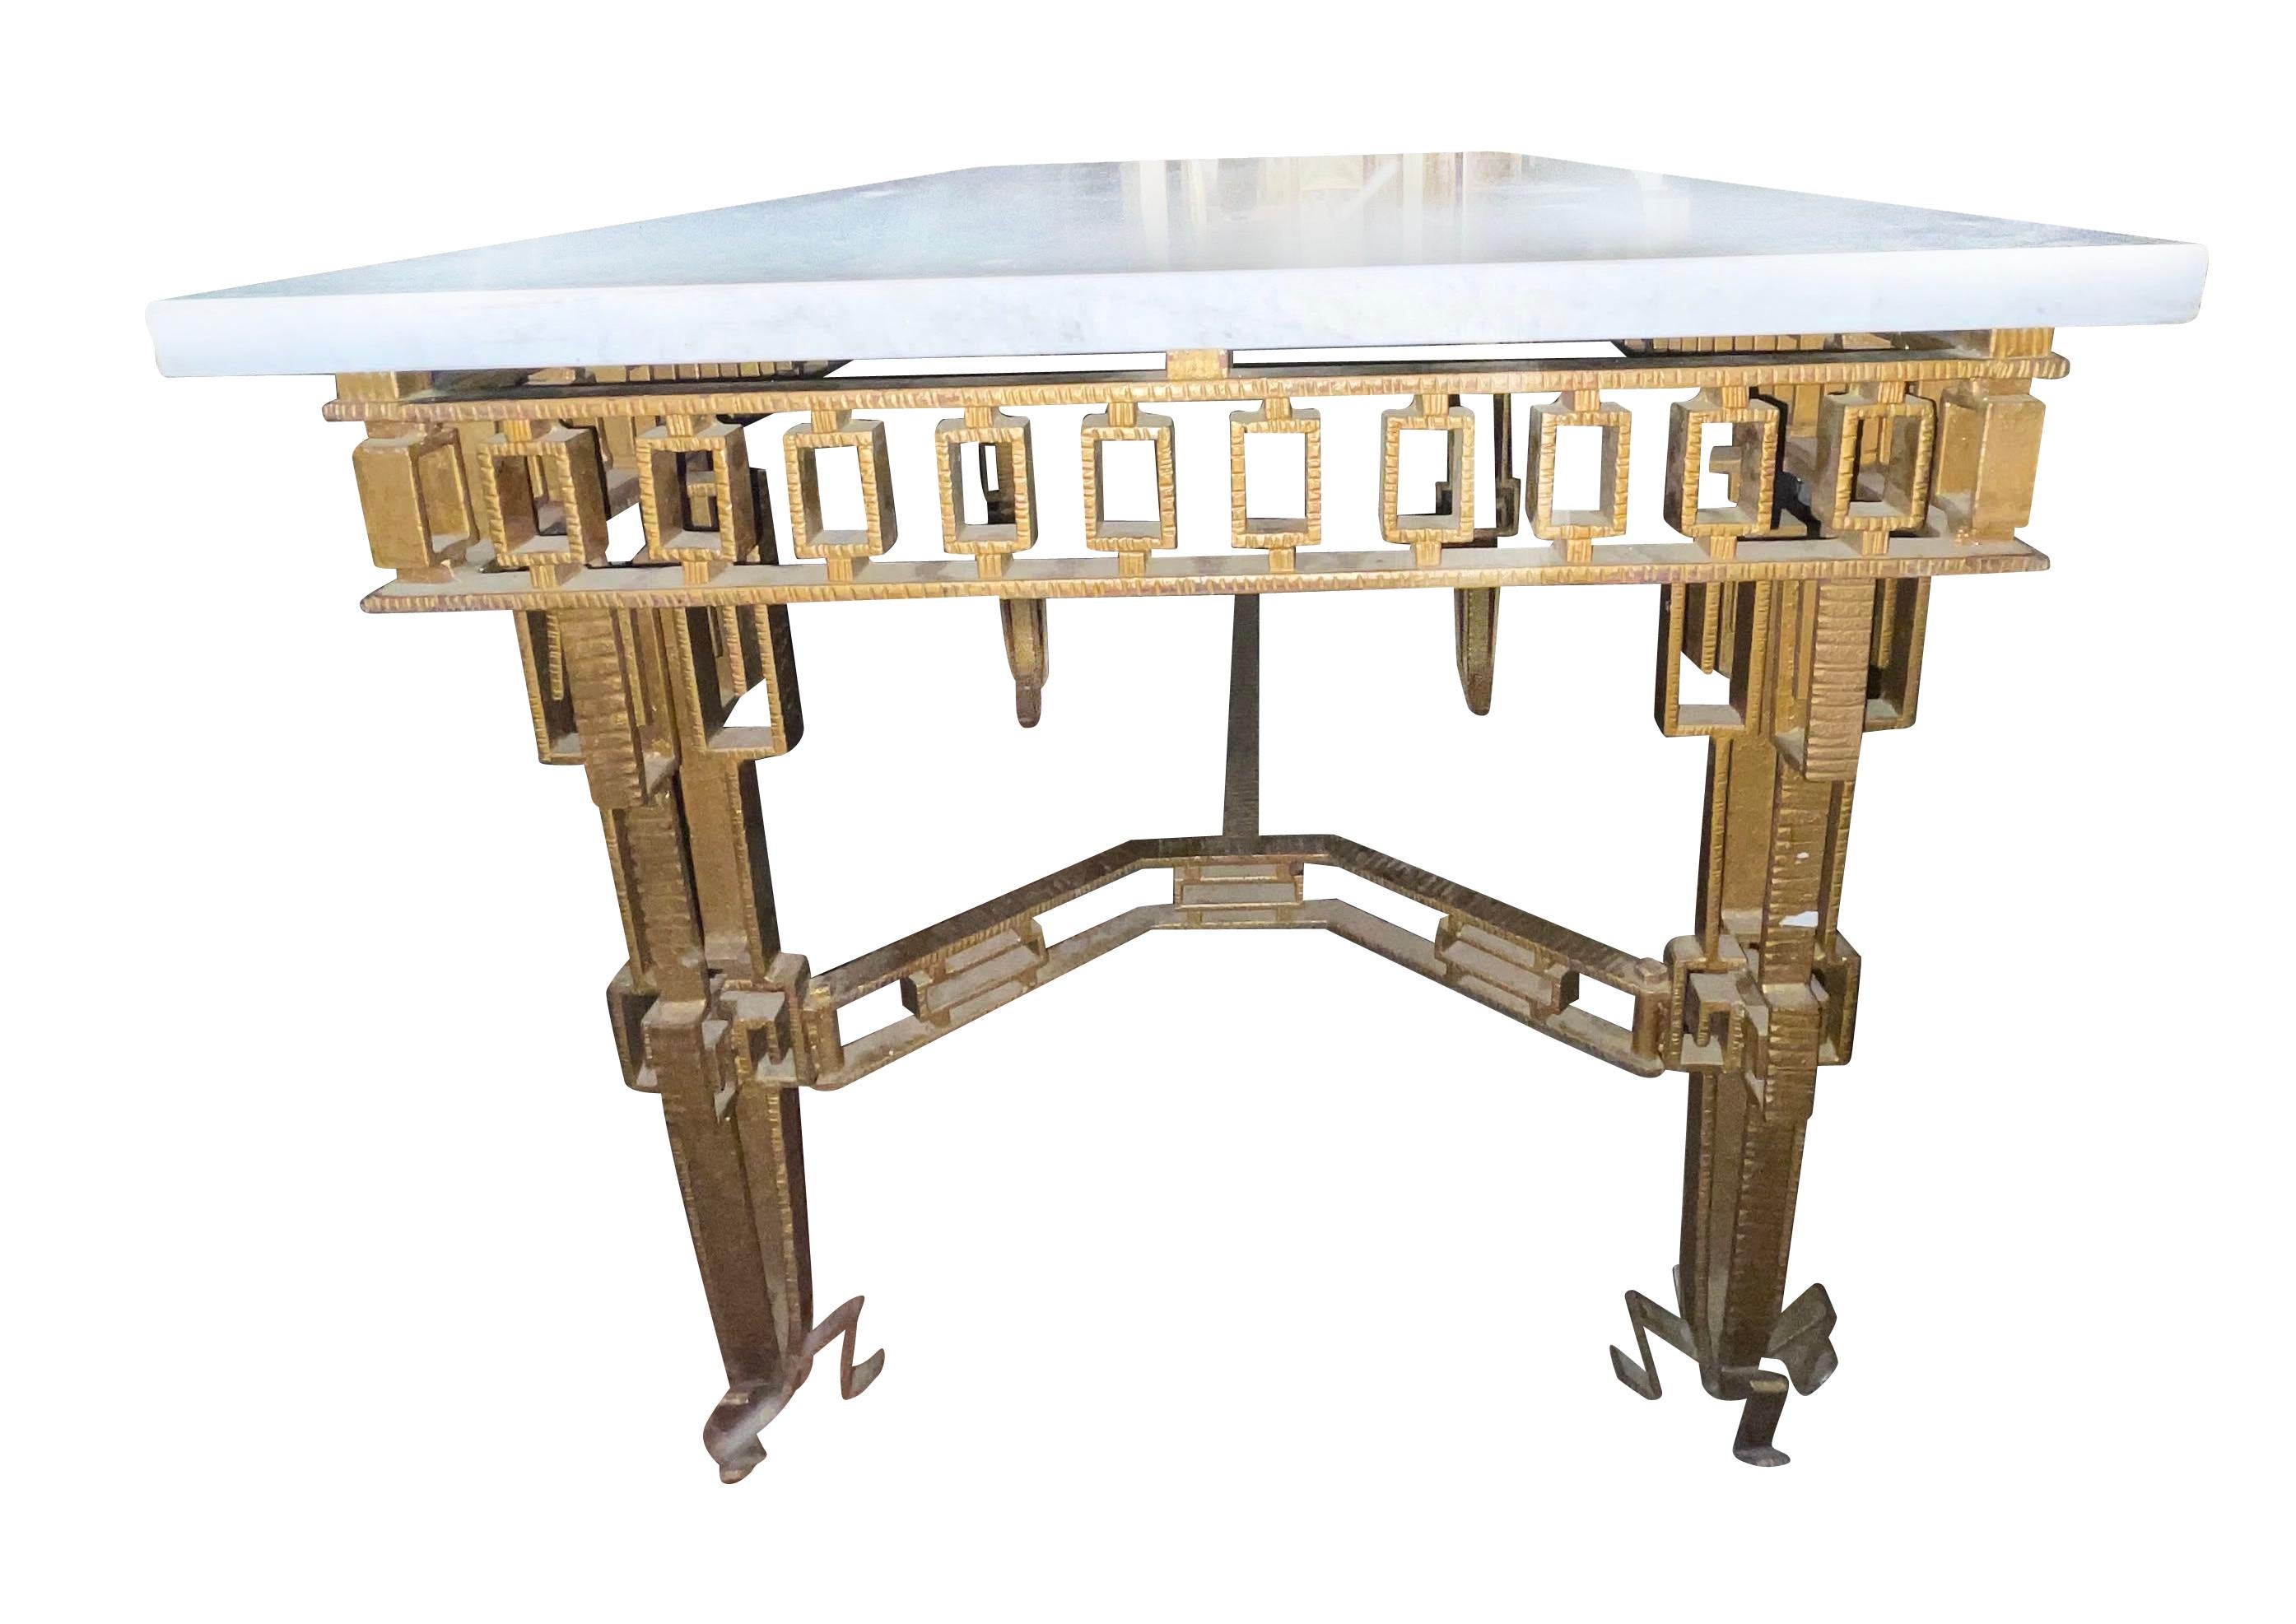 1960's Spanish gold gilt iron console table in the style of Jean Royere.
Interesting decorative detailing on the apron, stretchers and legs.
Thick white marble top.
Can also be used as a center hall table.
Coordinating mirror also available